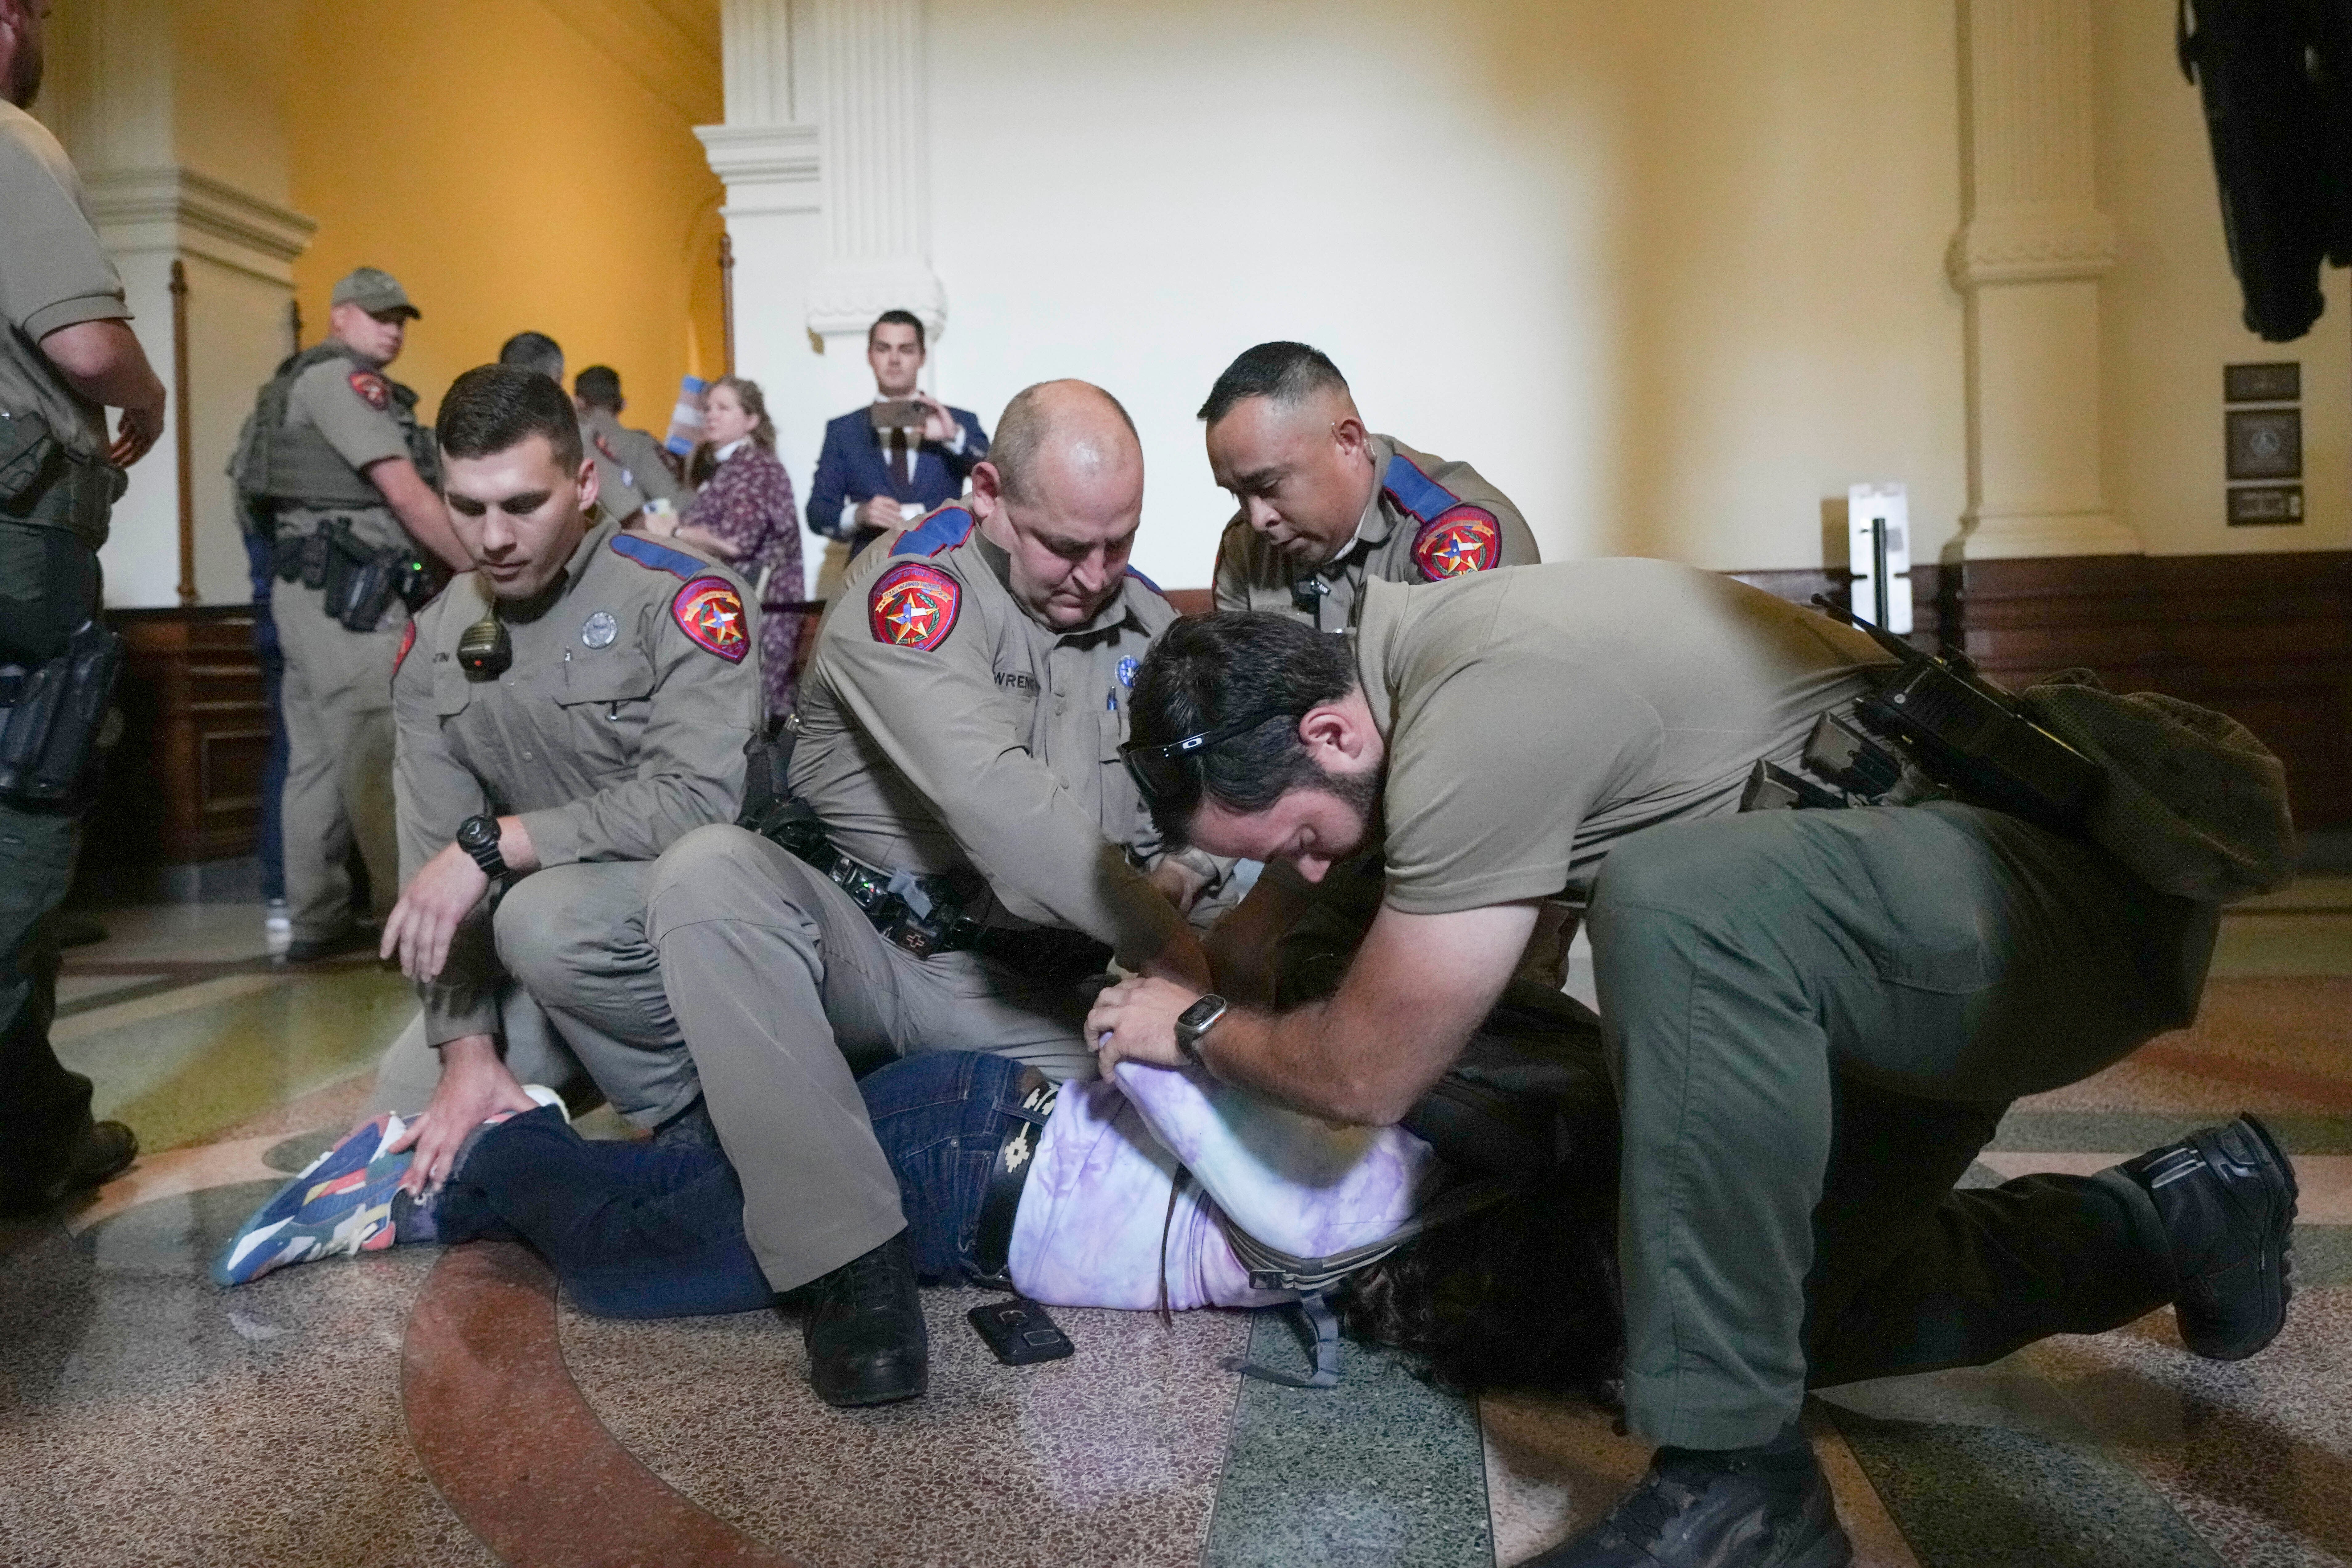 An LGBT+ rights activist is detained by Department of Public Safety troopers as activists protest SB14 outside the House of Representatives gallery at the Texas State Capitol in Austin